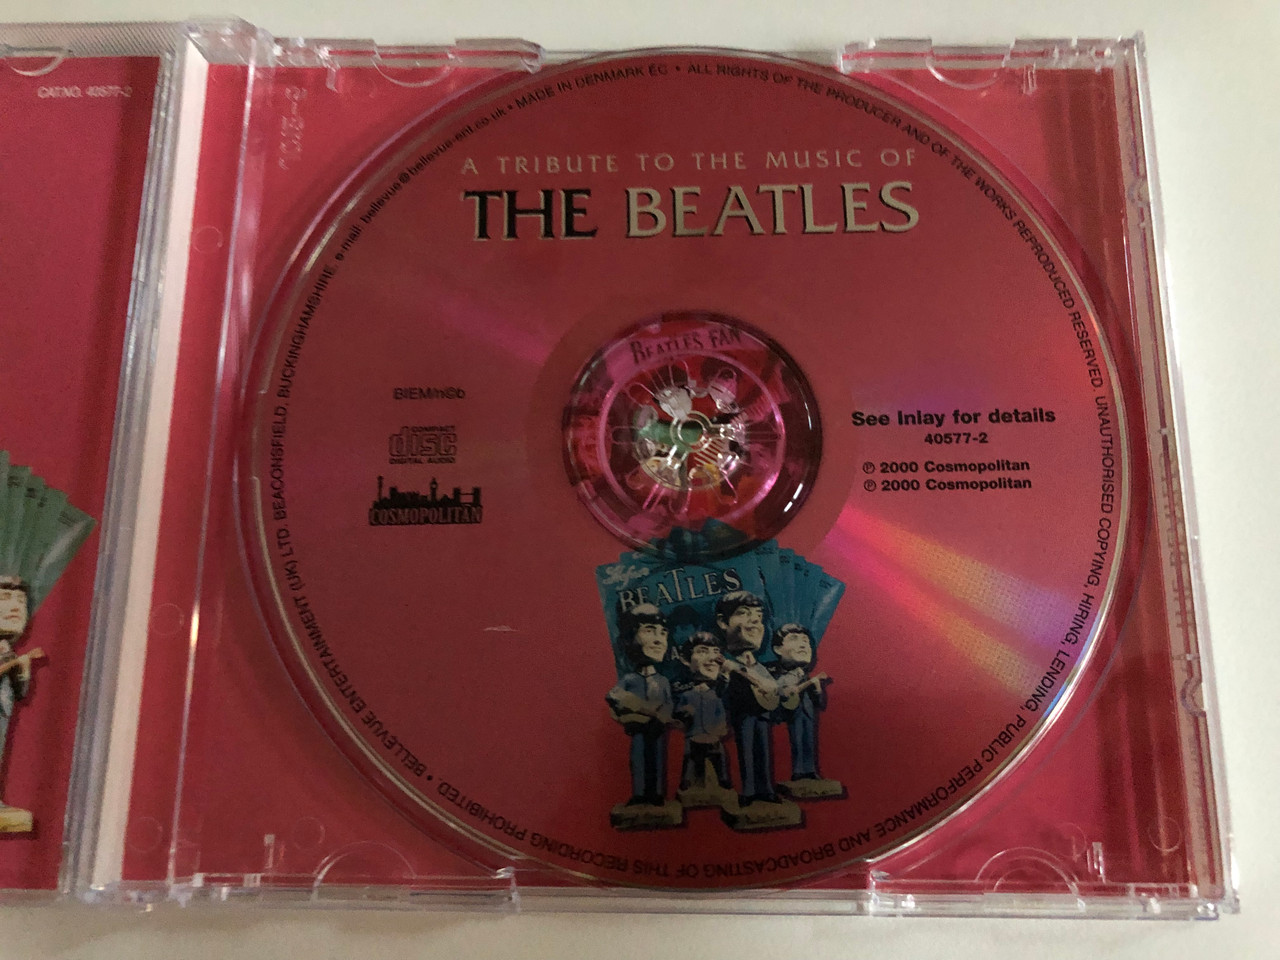 https://cdn10.bigcommerce.com/s-62bdpkt7pb/products/0/images/187397/A_Tribute_To_The_Music_Of_The_Beatles_-_Performed_by_The_Kavans_Including_Penny_Lane_I_Want_To_Hold_Your_Hand_She_Loves_You_Hey_Jude_and_many_more_Cosmopolitan_Audio_CD_2000_40577-2_3__70726.1628830083.1280.1280.JPG?c=2&_gl=1*zoqawk*_ga*MjA2NTIxMjE2MC4xNTkwNTEyNTMy*_ga_WS2VZYPC6G*MTYyODgyOTg2OC4zMS4xLjE2Mjg4MzAxOTkuNjA.